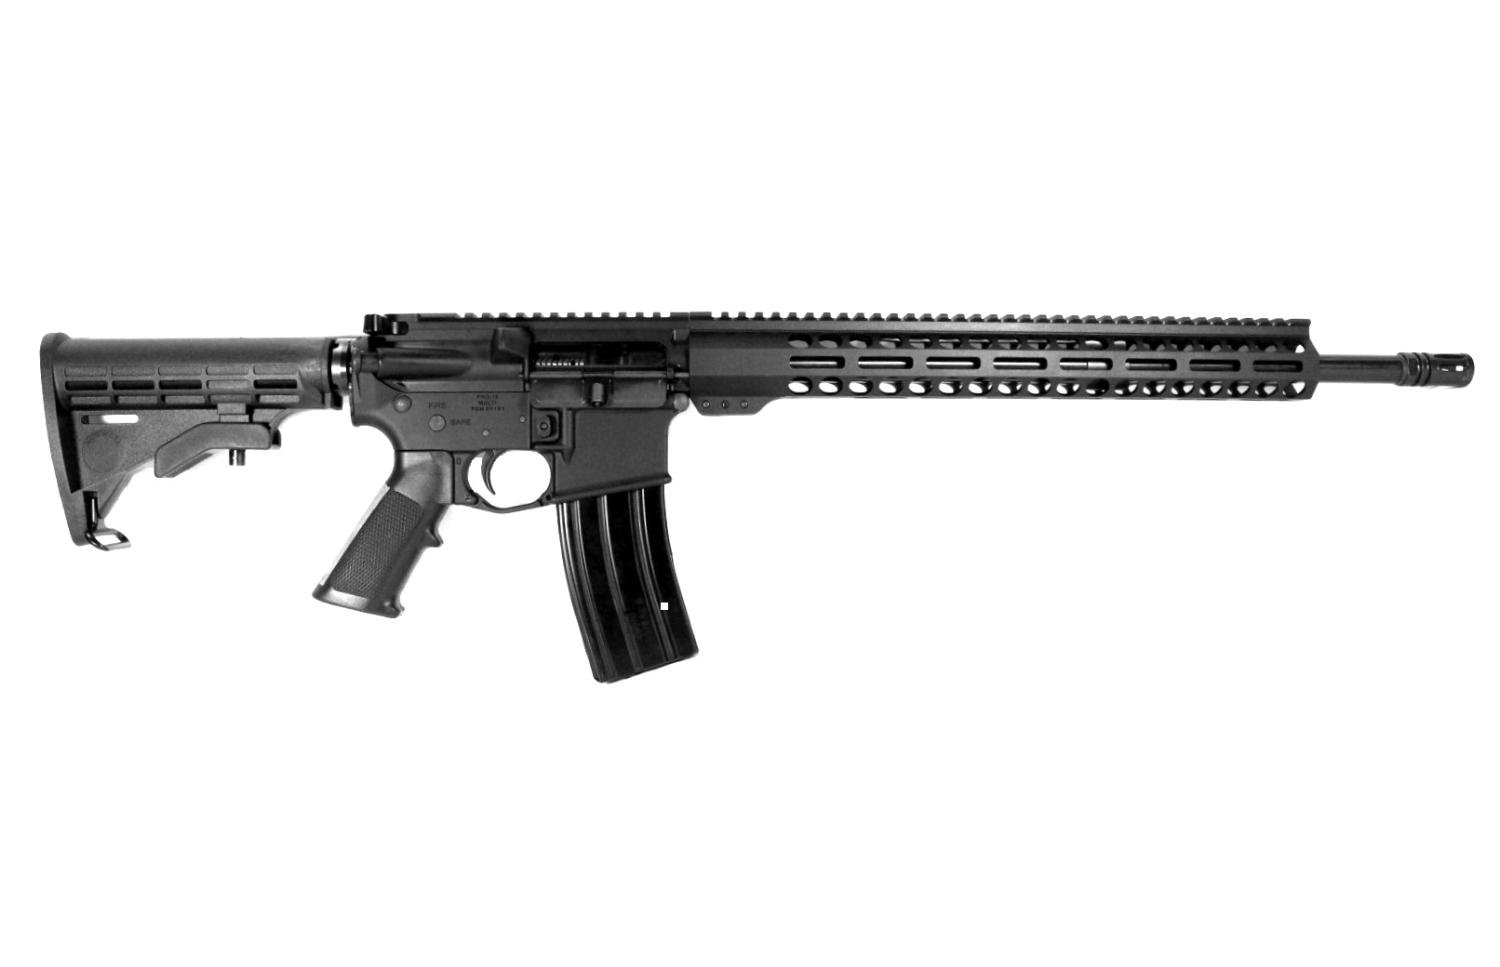 P2A "Patriot" 18 inch AR-15 6.8 SPC II M-LOK Complete Rifle - $756.49 after 15% off